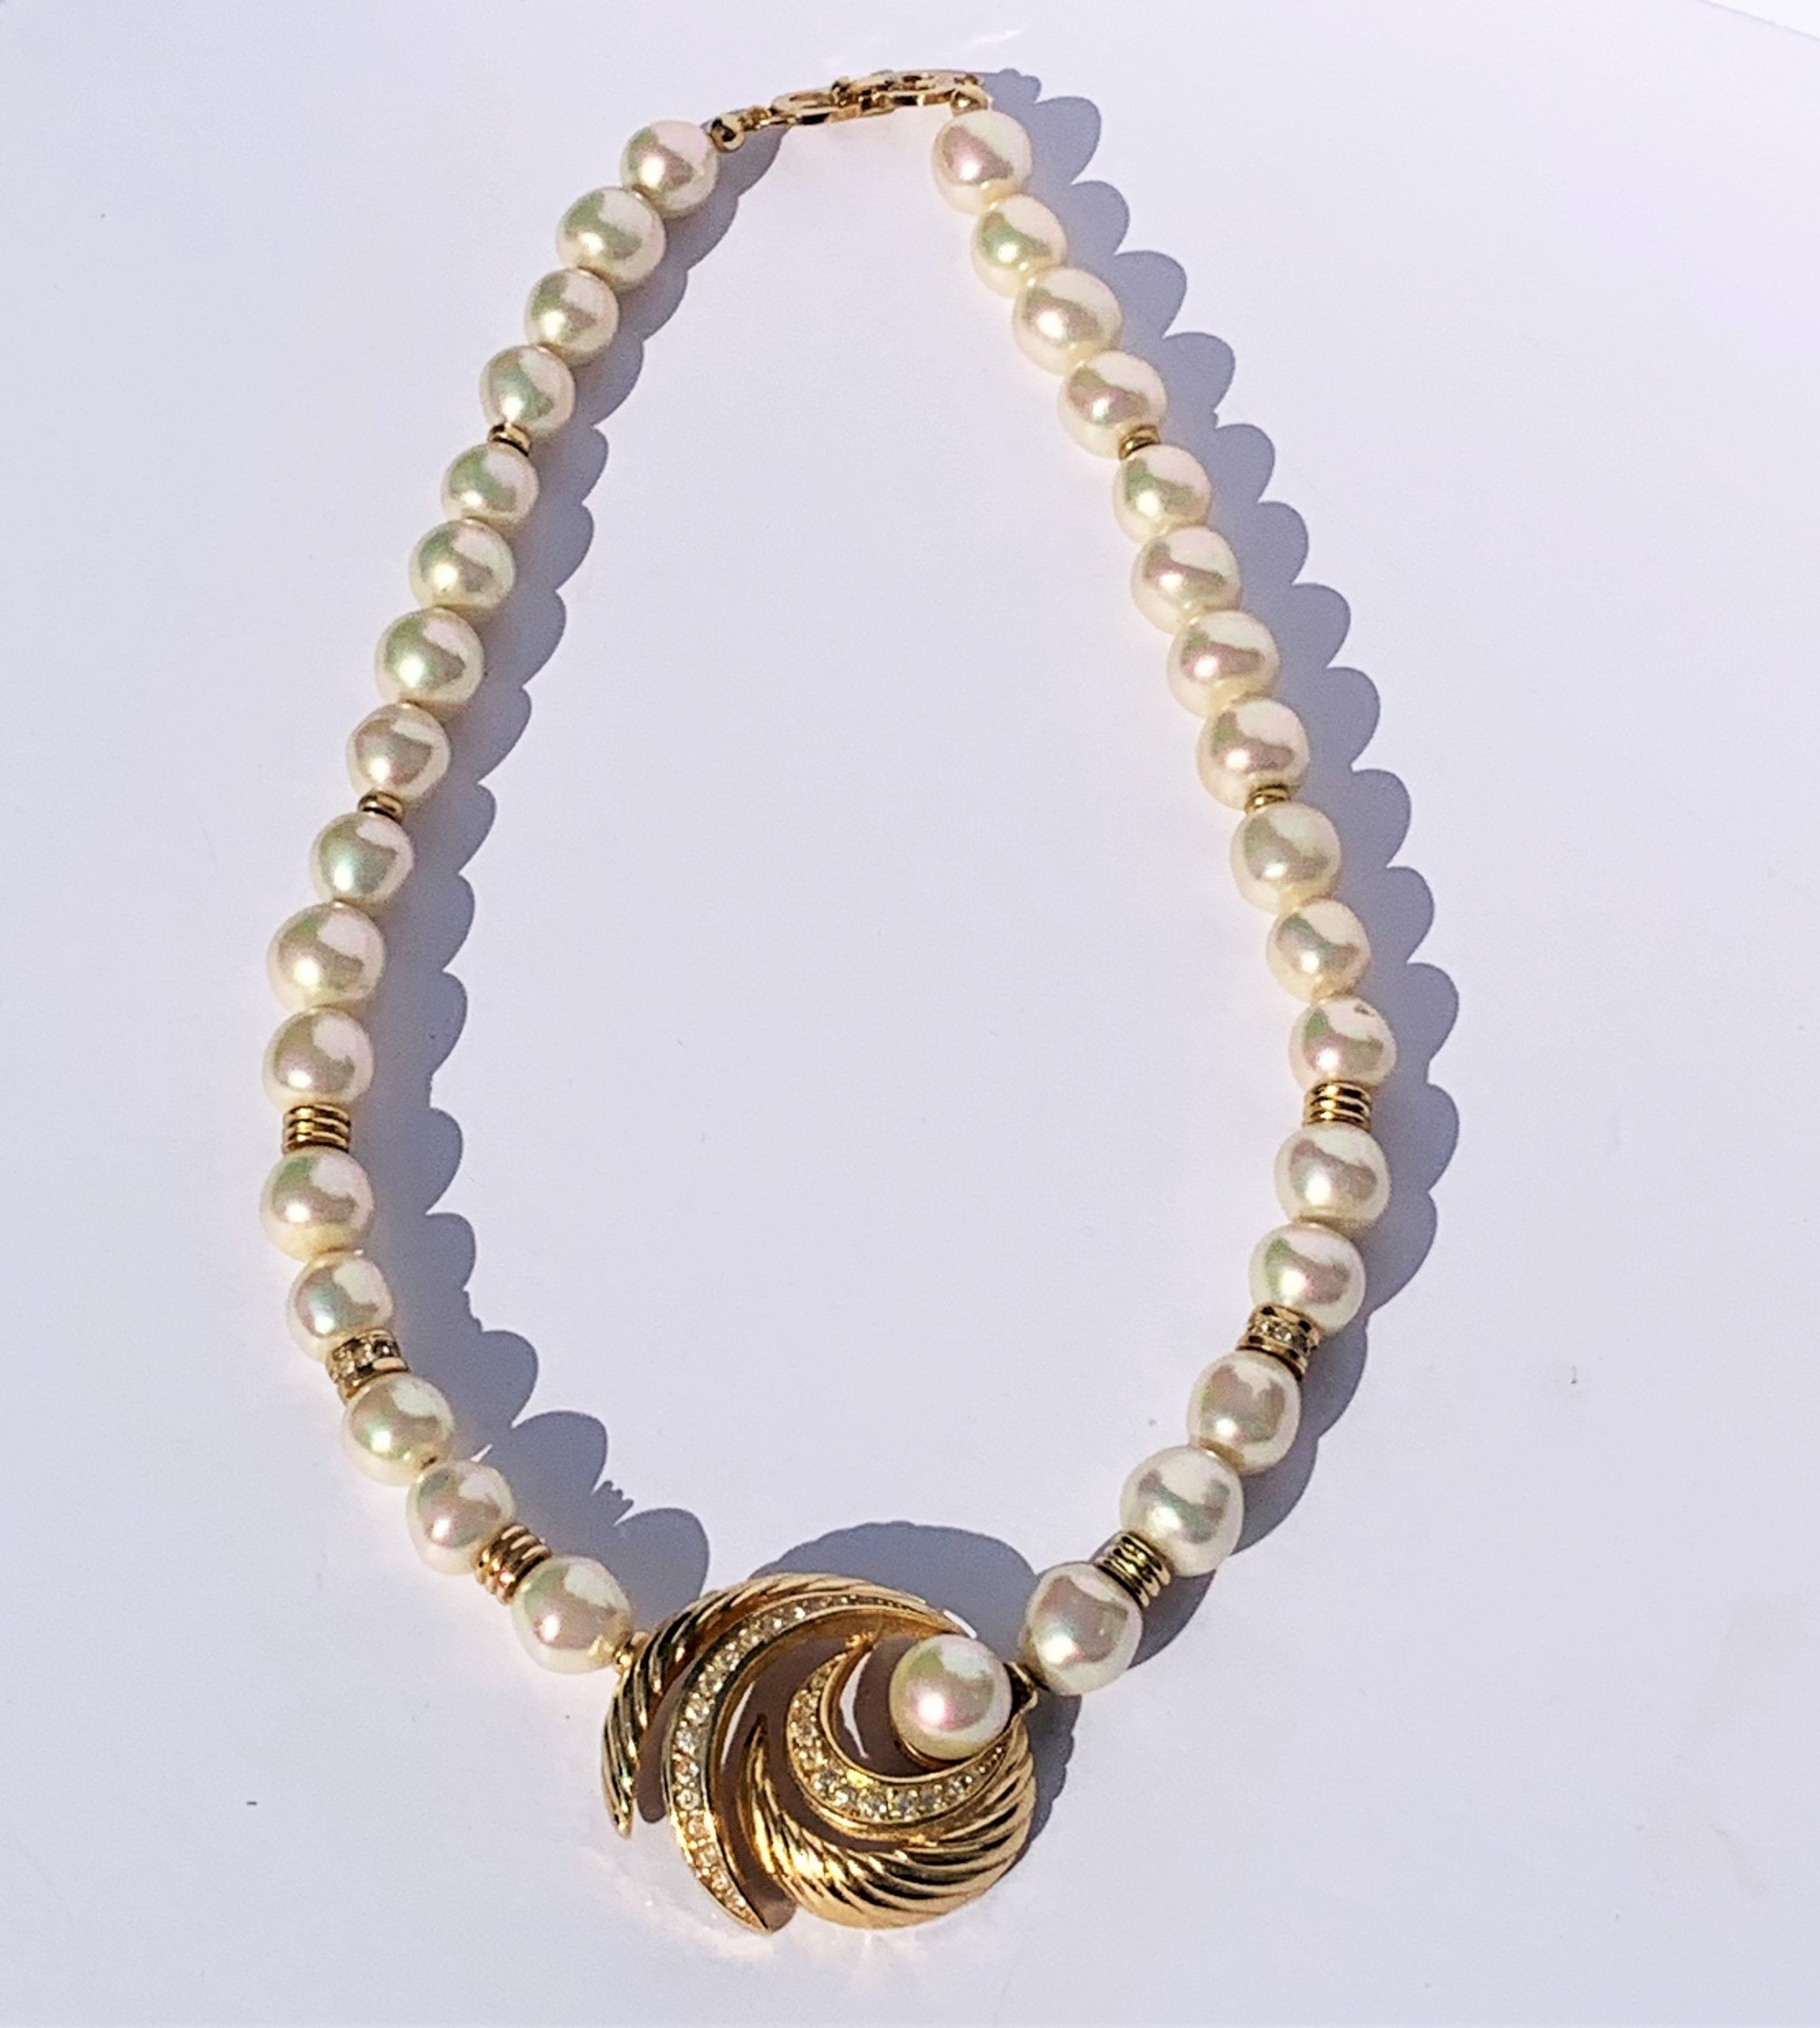 Costume pearl and gold plated swirl necklace